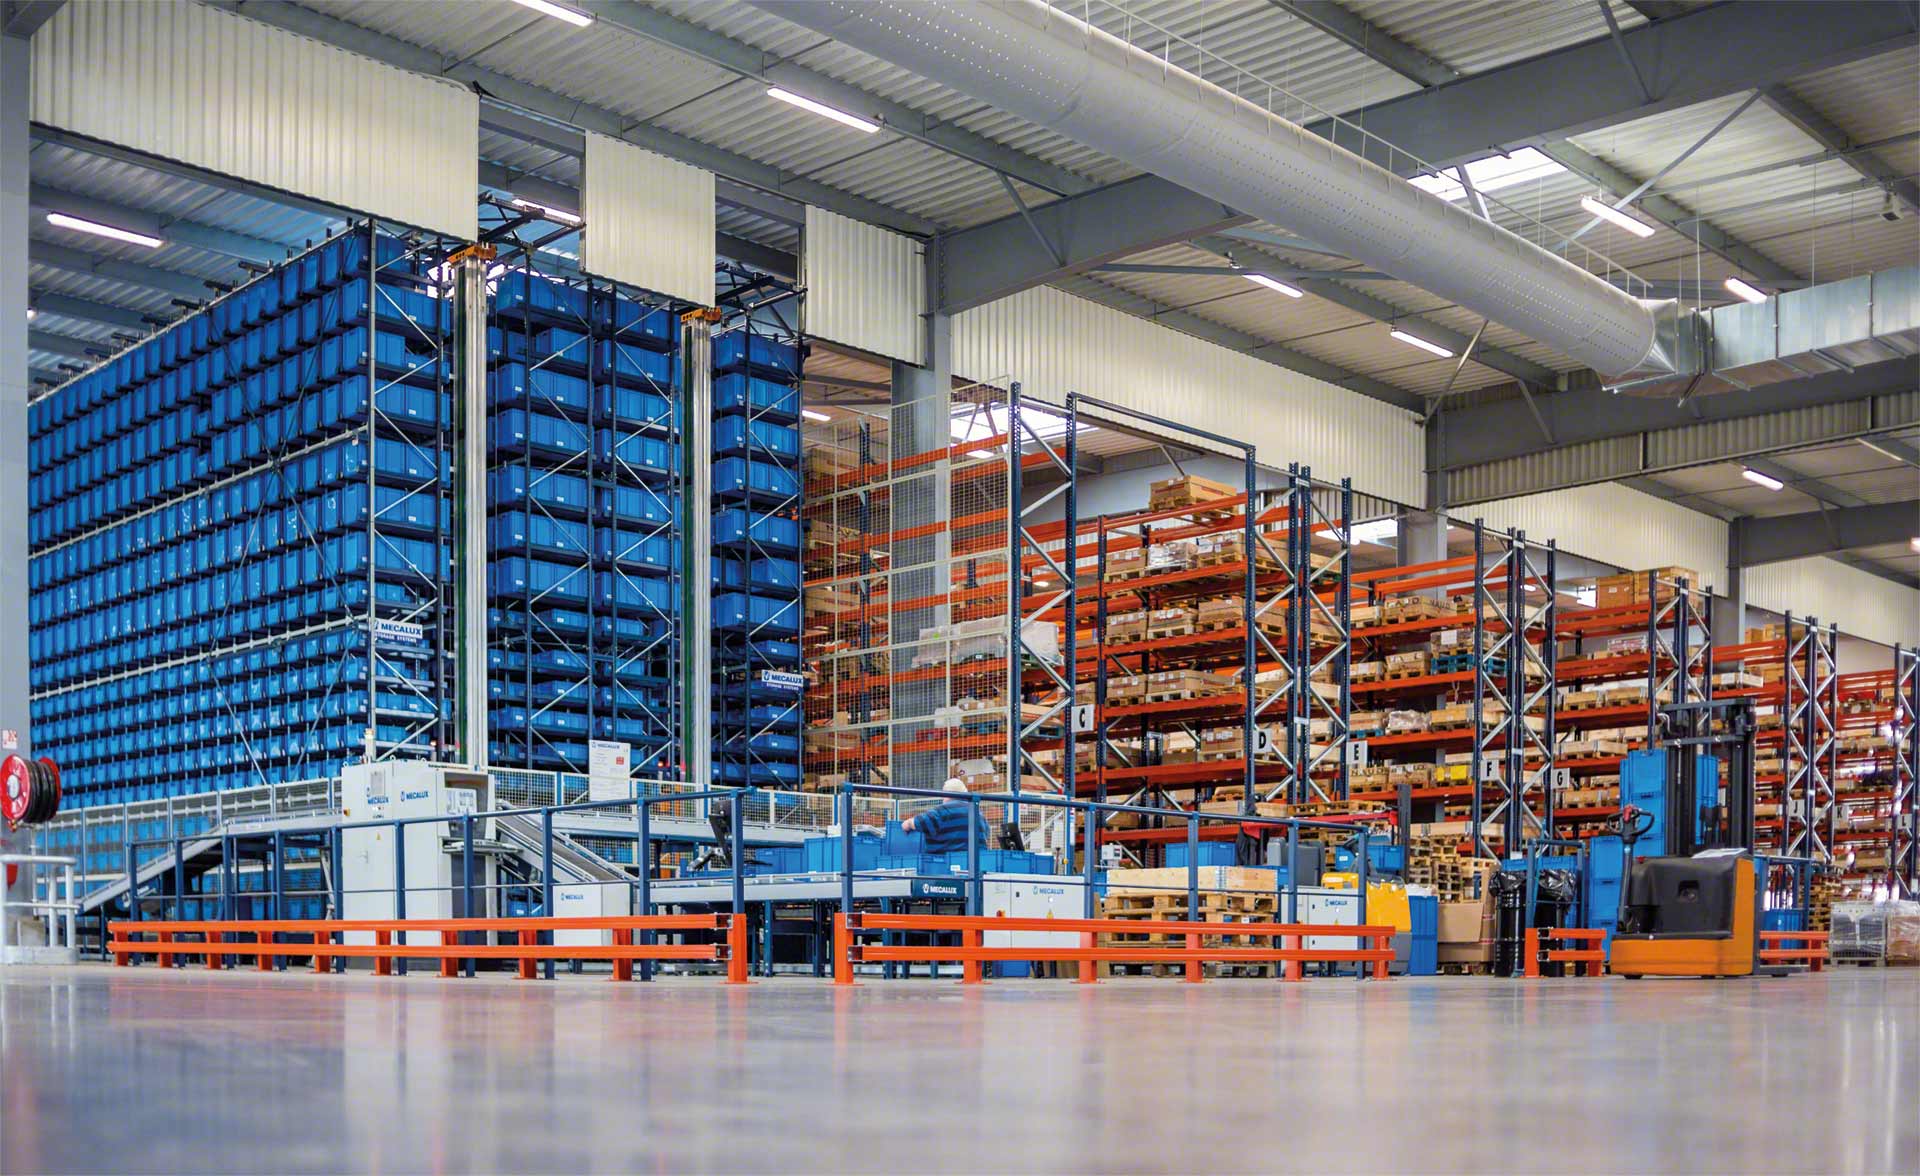 Racks are the most effective storage system for storing goods